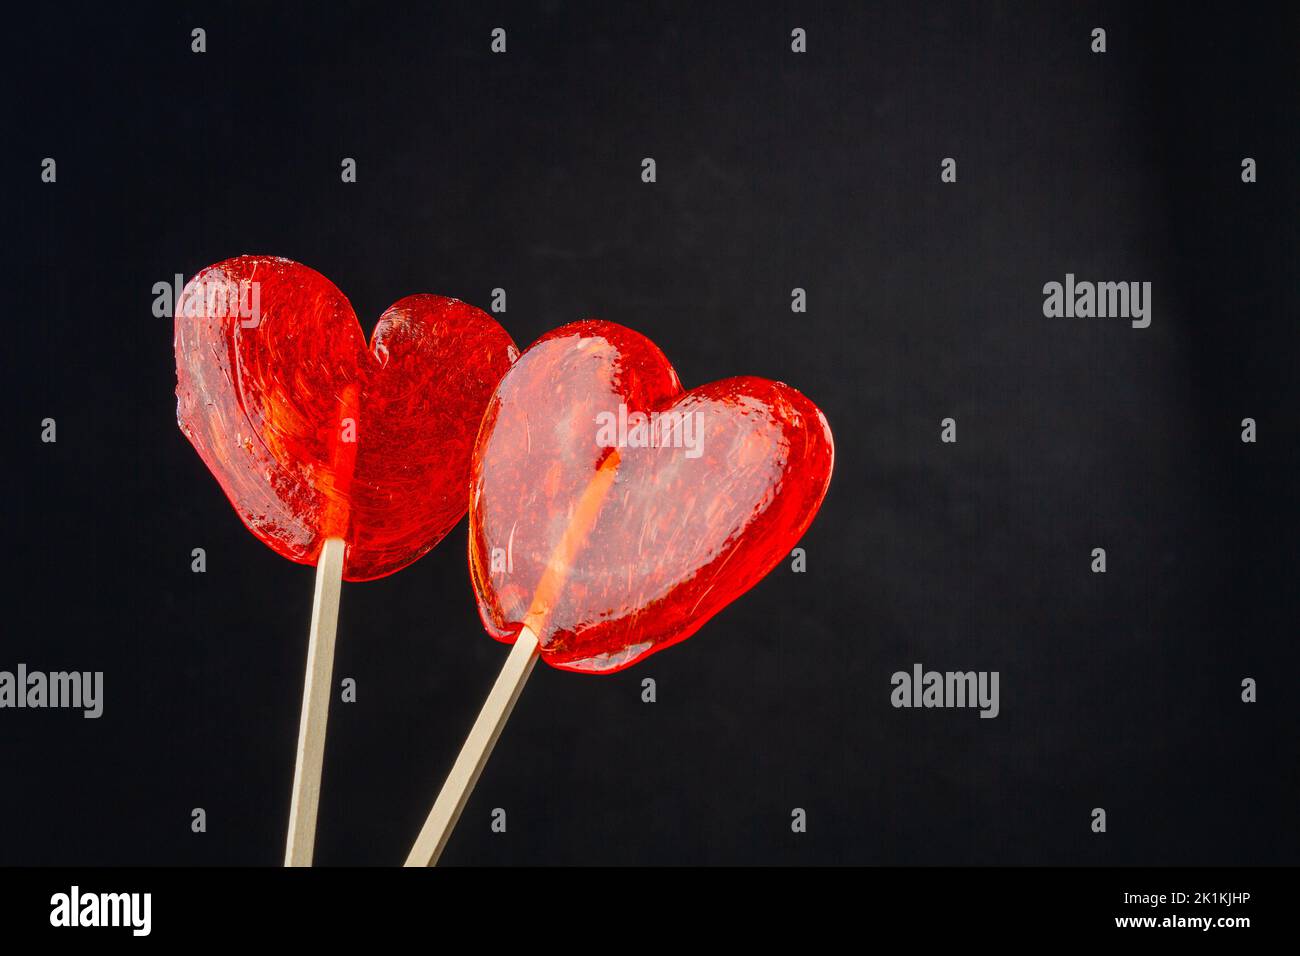 Two red lollipop candies and copy space. Isolated on black. Stock Photo